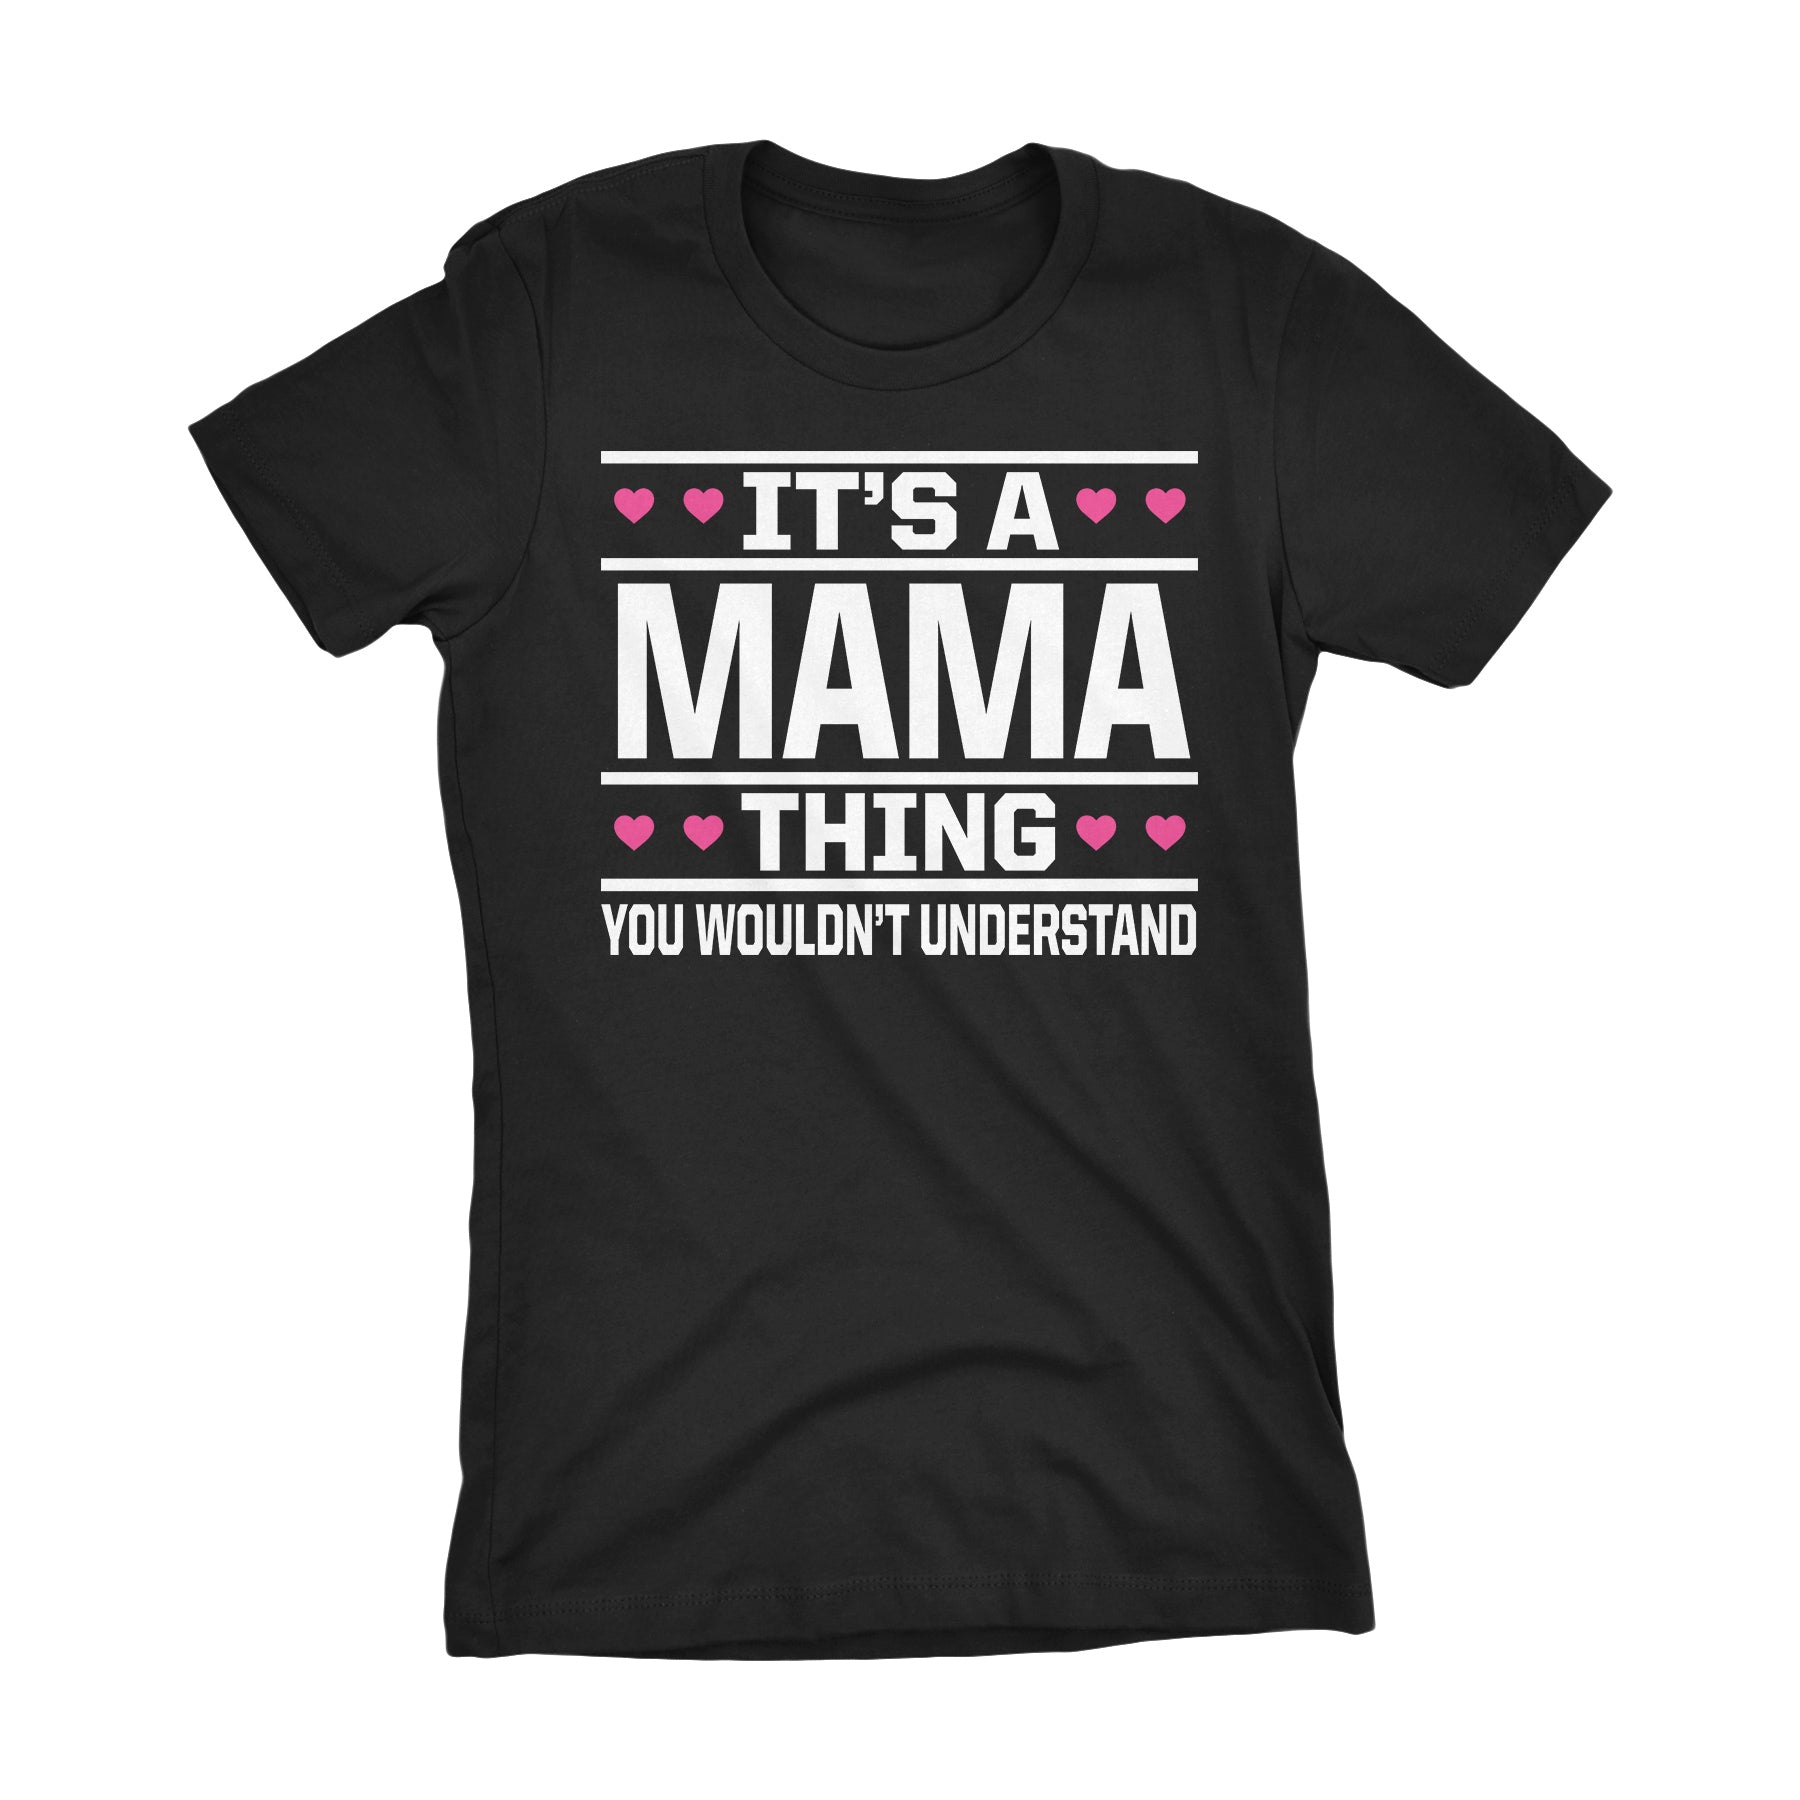 It's A MAMA Thing You Wouldn't Understand - 003 Mom Ladies Fit T-shirt